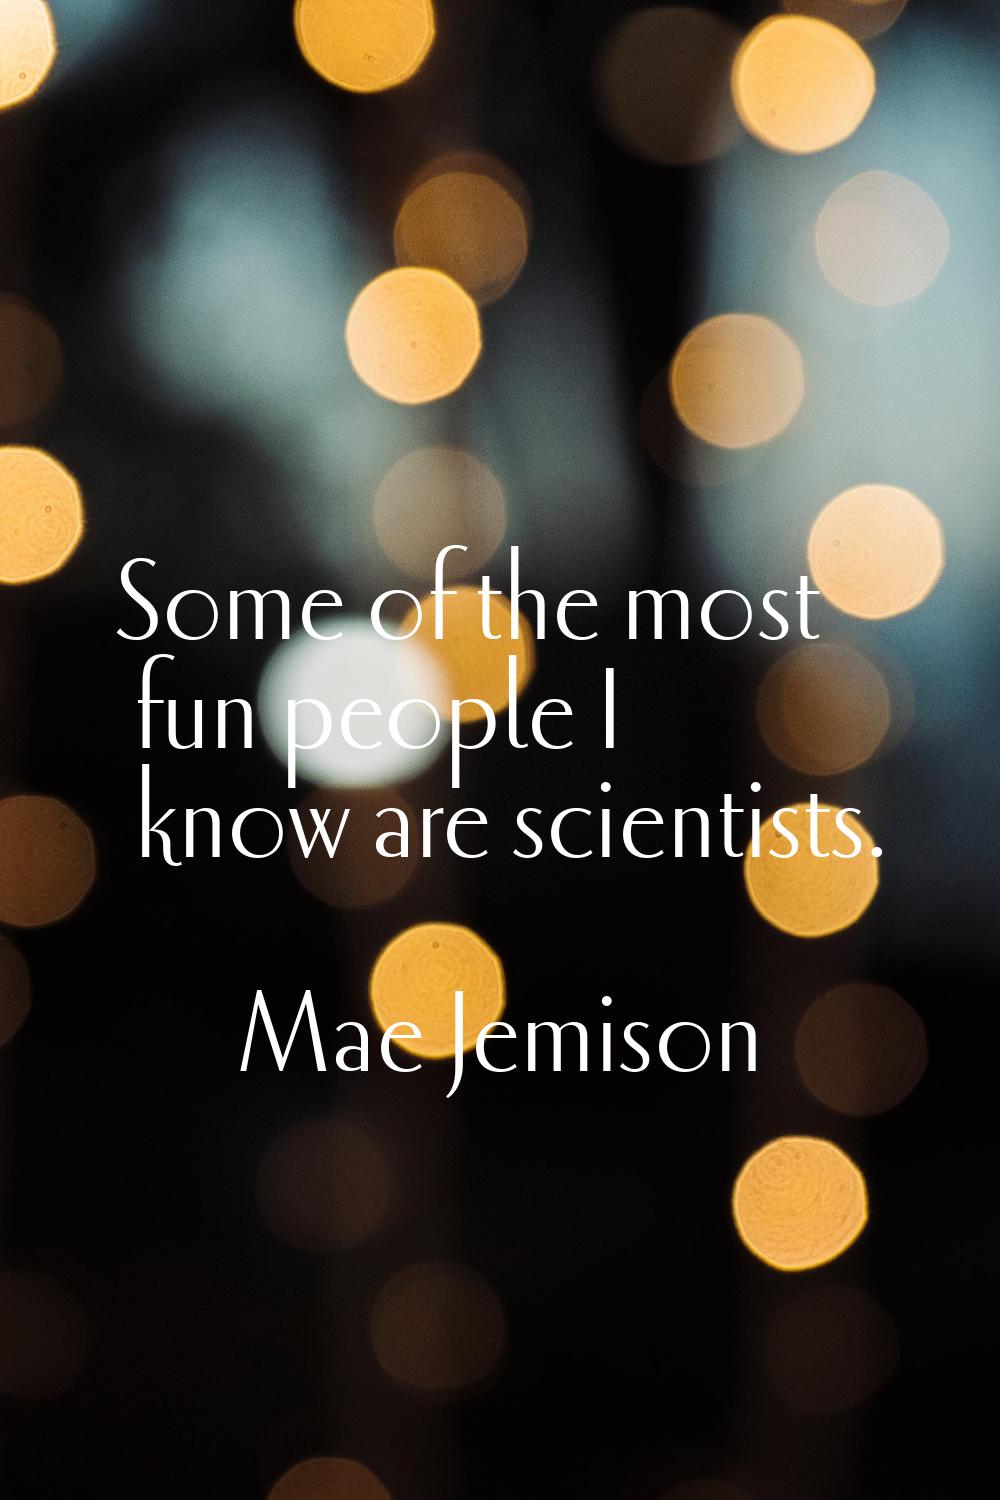 Some of the most fun people I know are scientists.